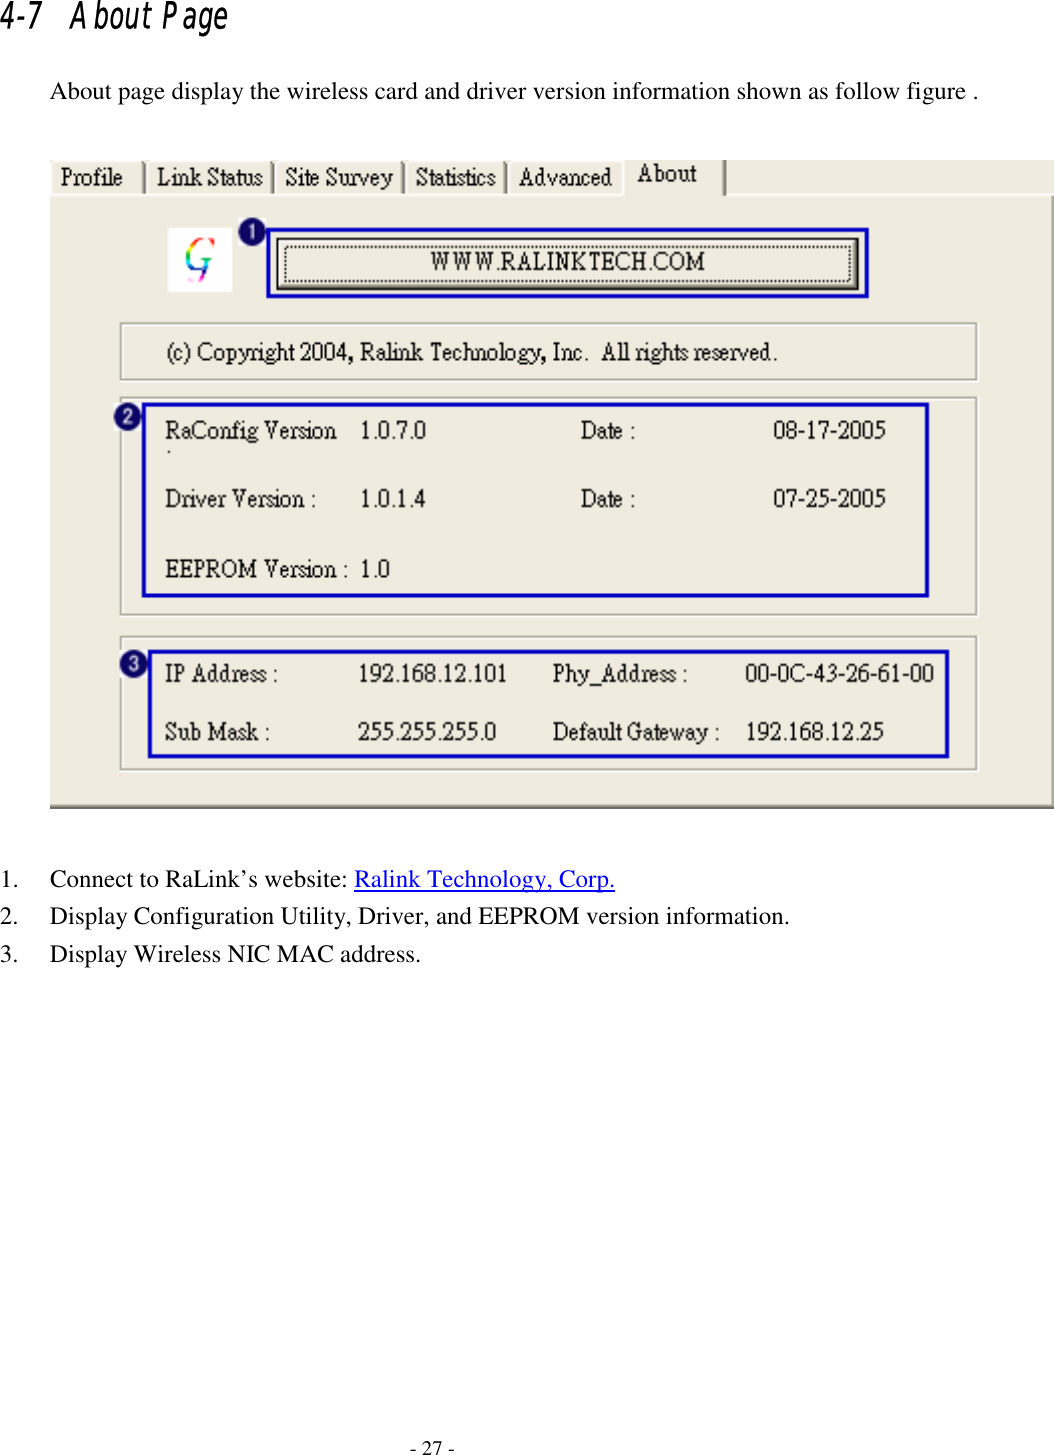    - 27 - 4-7   About Page About page display the wireless card and driver version information shown as follow figure .   1. Connect to RaLink’s website: Ralink Technology, Corp. 2. Display Configuration Utility, Driver, and EEPROM version information. 3. Display Wireless NIC MAC address. 